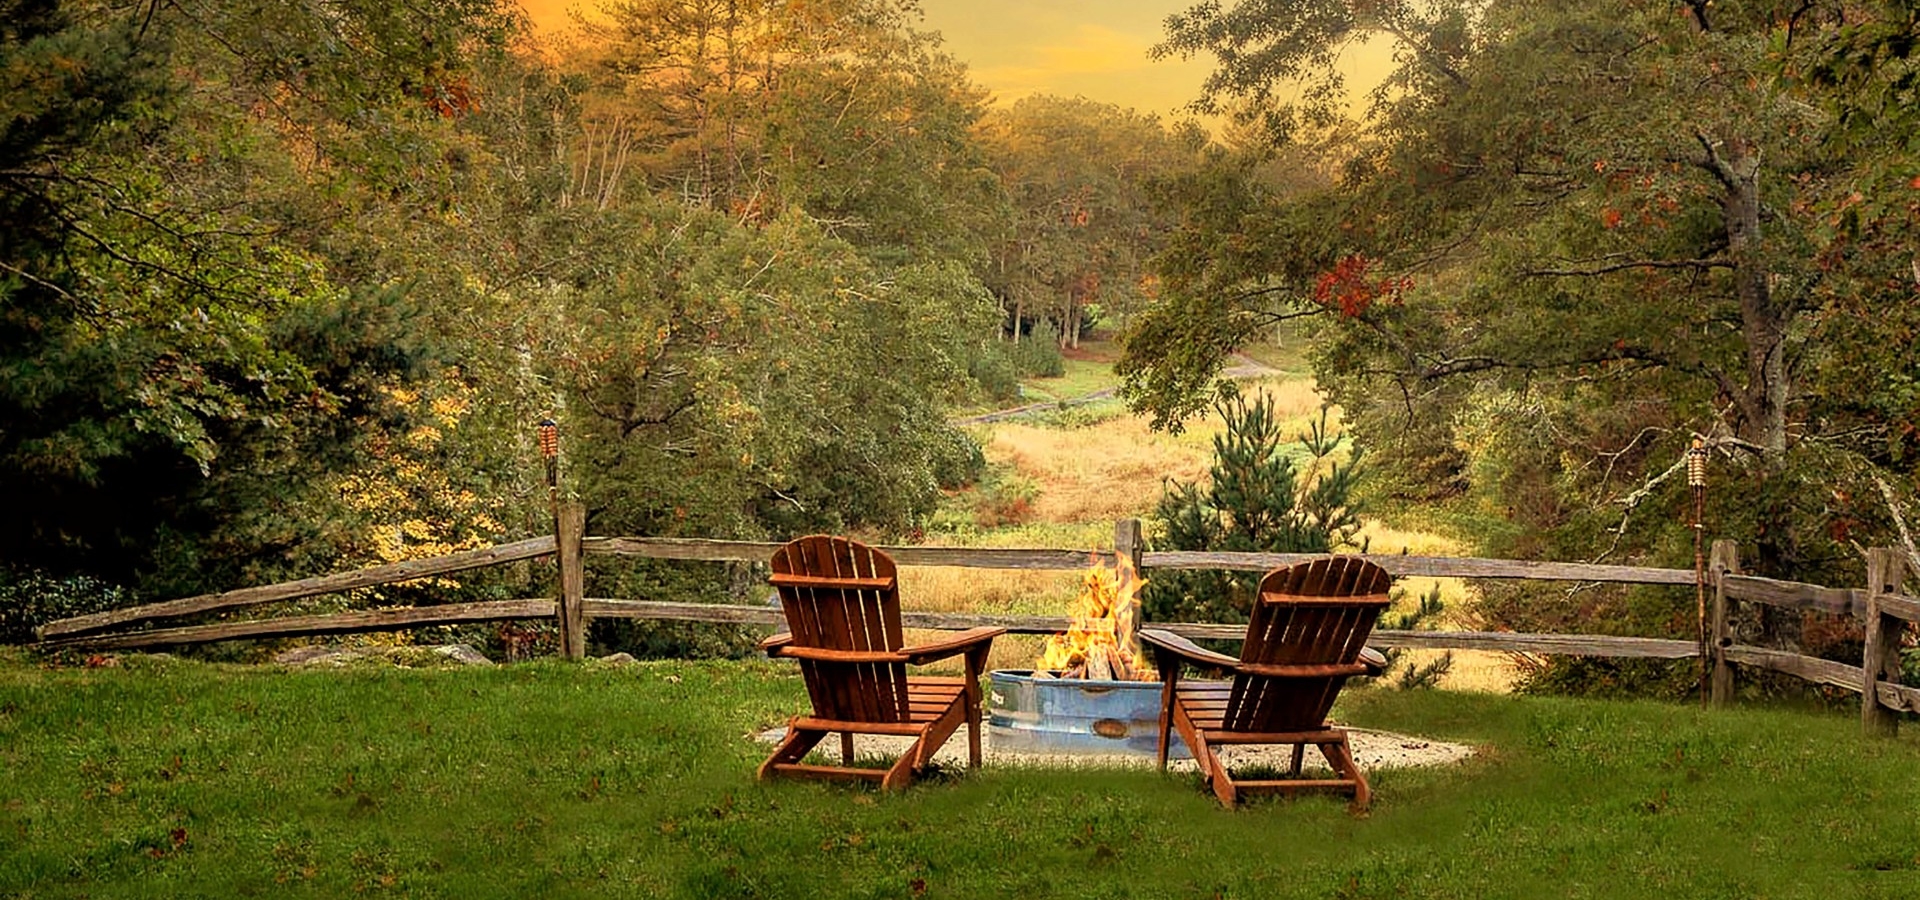 Cozy fire pit with chairs overlooking New England wilderness